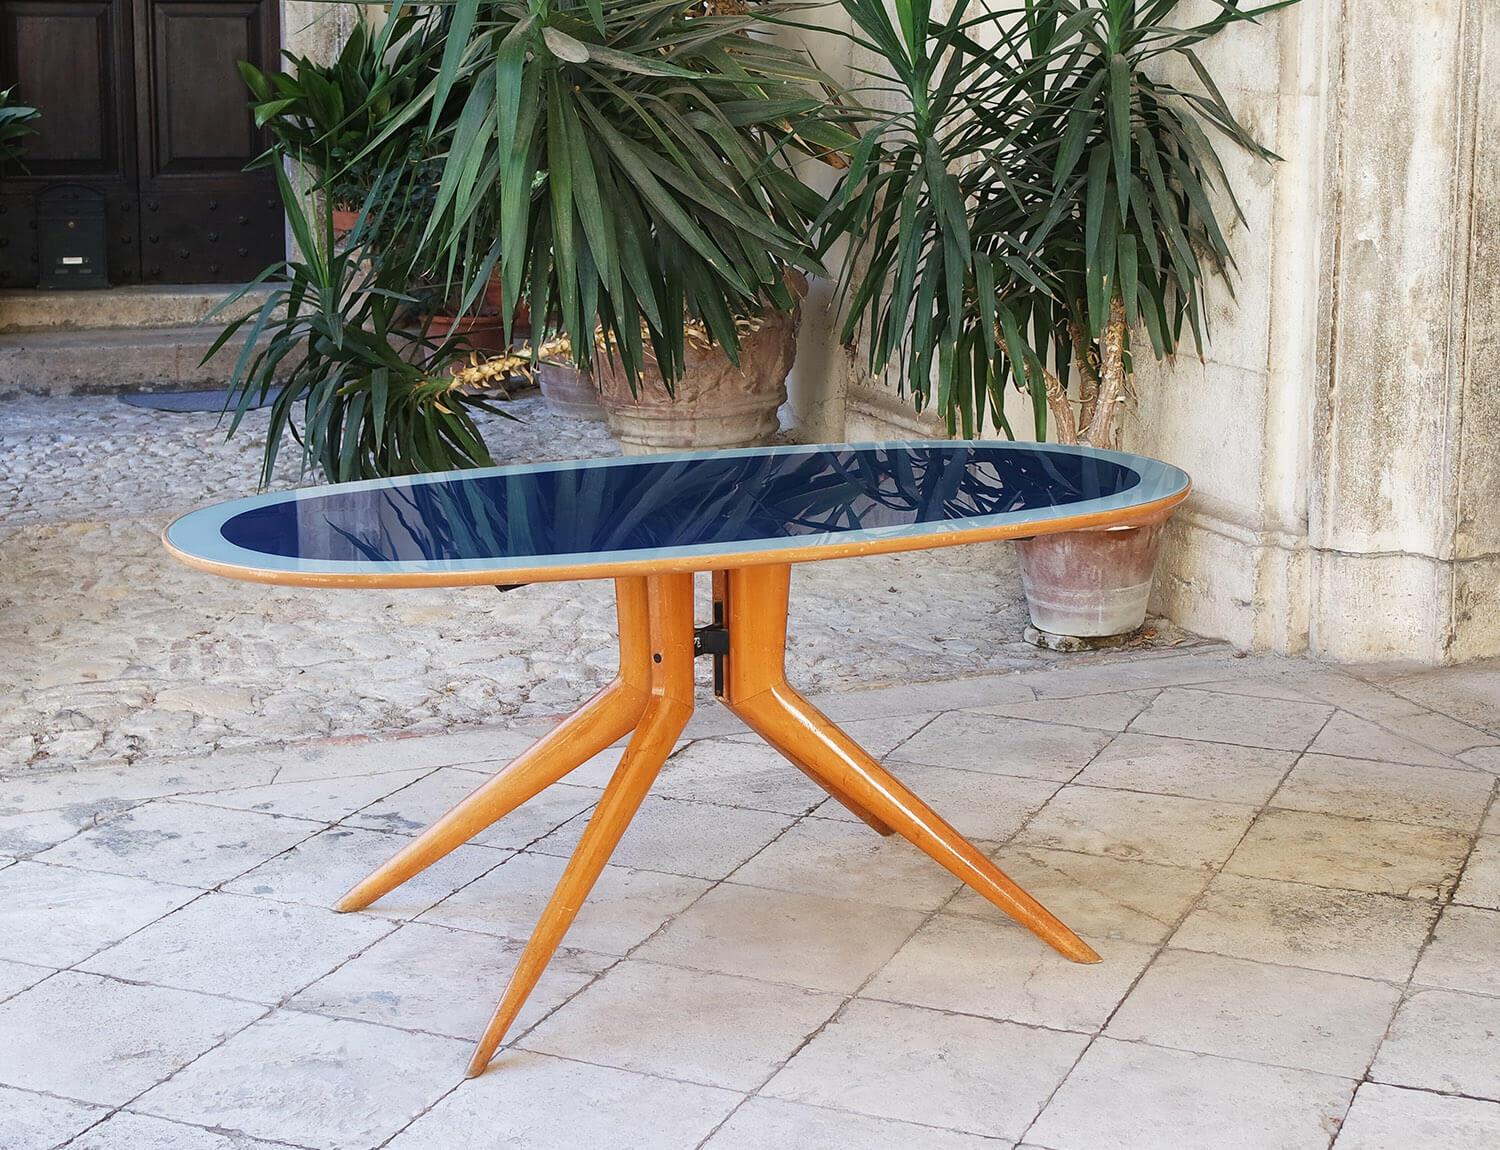 Exceptional blue and pale blue glass oval dining table designed and created by the renowned Italian designer, Ico Parisi in the 1950s. The light coloured wooden iconic Ico Parisi base and legs support this wonderful glass table top. The central